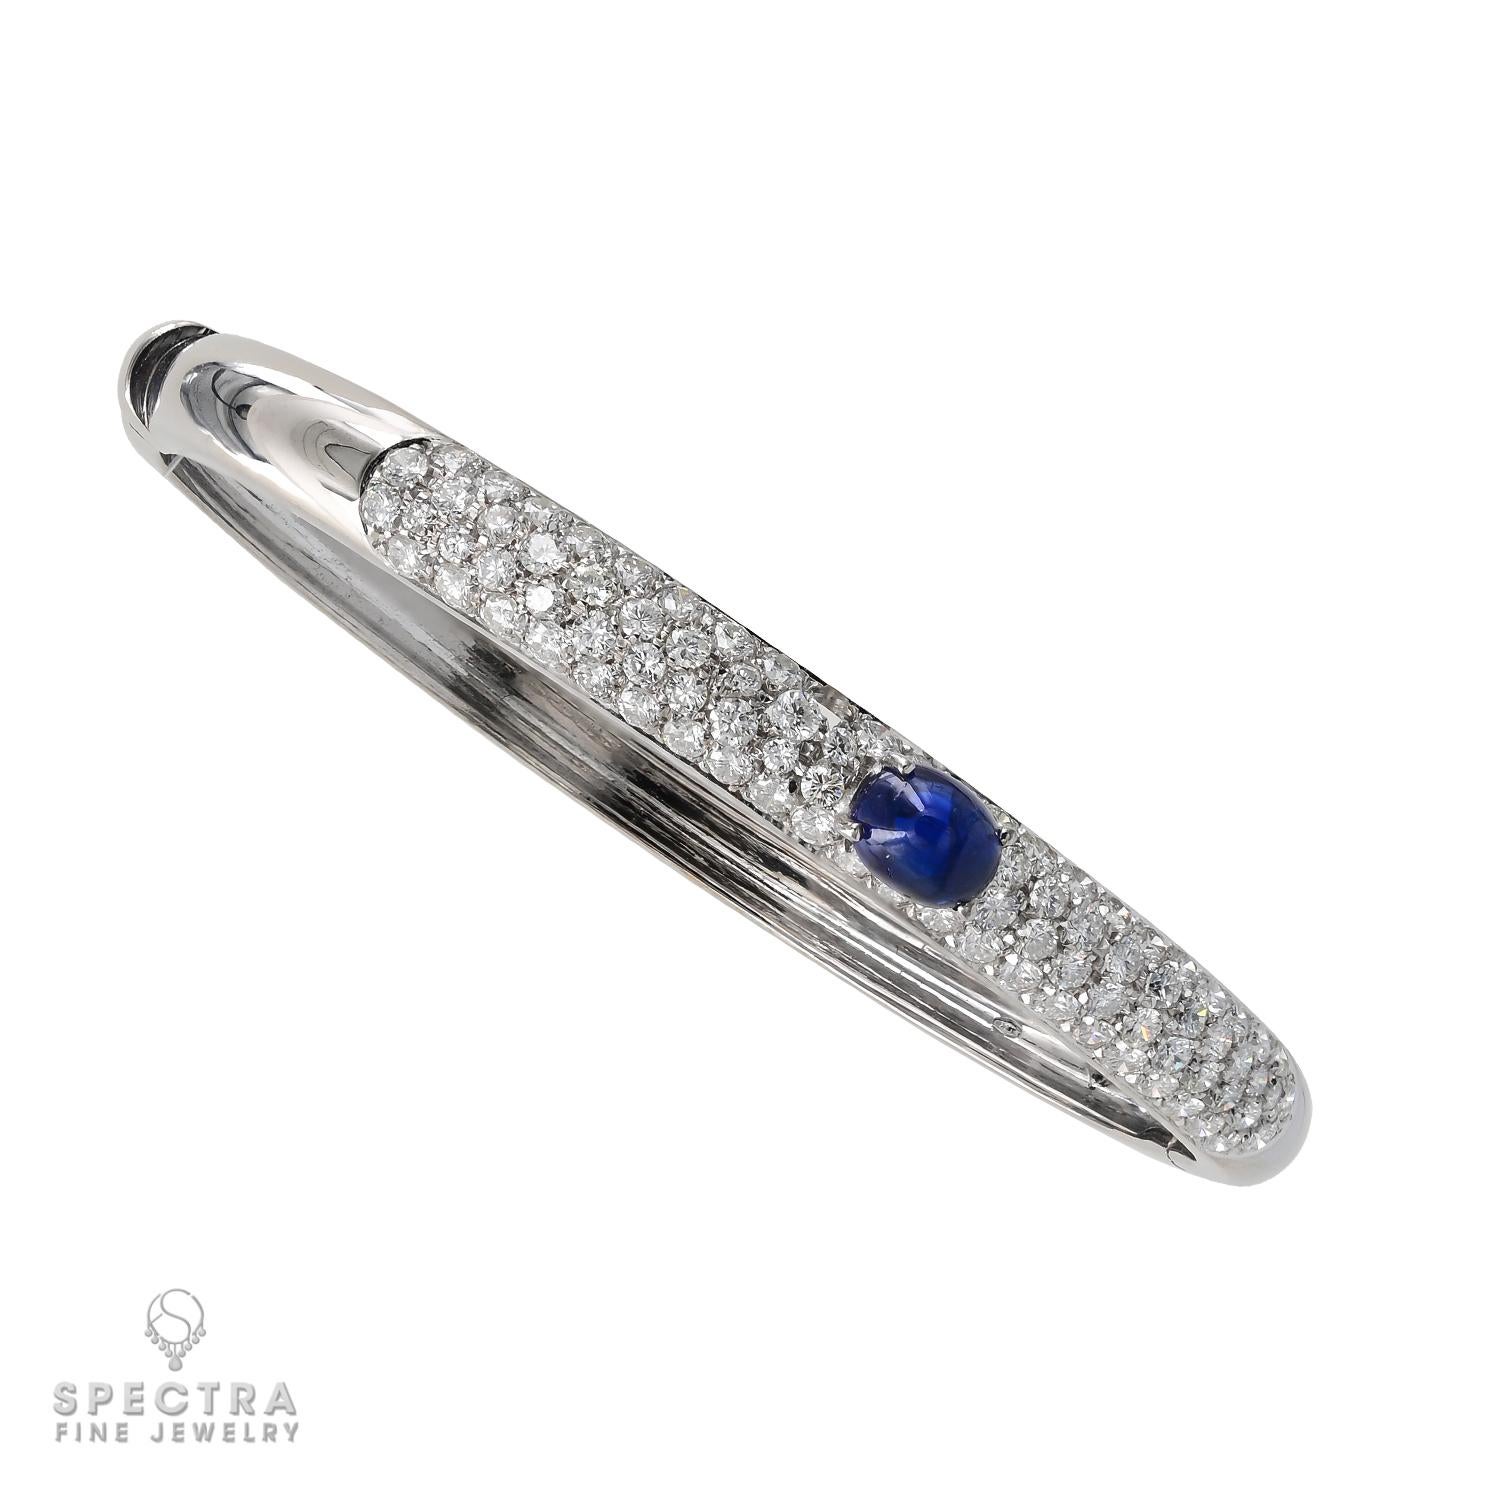 Crafted in 18K white gold, this Contemporary Oval Sapphire Diamond Pavé Bangle Bracelet dazzles with a 1.49-carat cabochon sapphire embraced by sparkling diamonds weighing 2.40 carats in total. The diamonds are mostly with G-H color, VS-SI clarity.